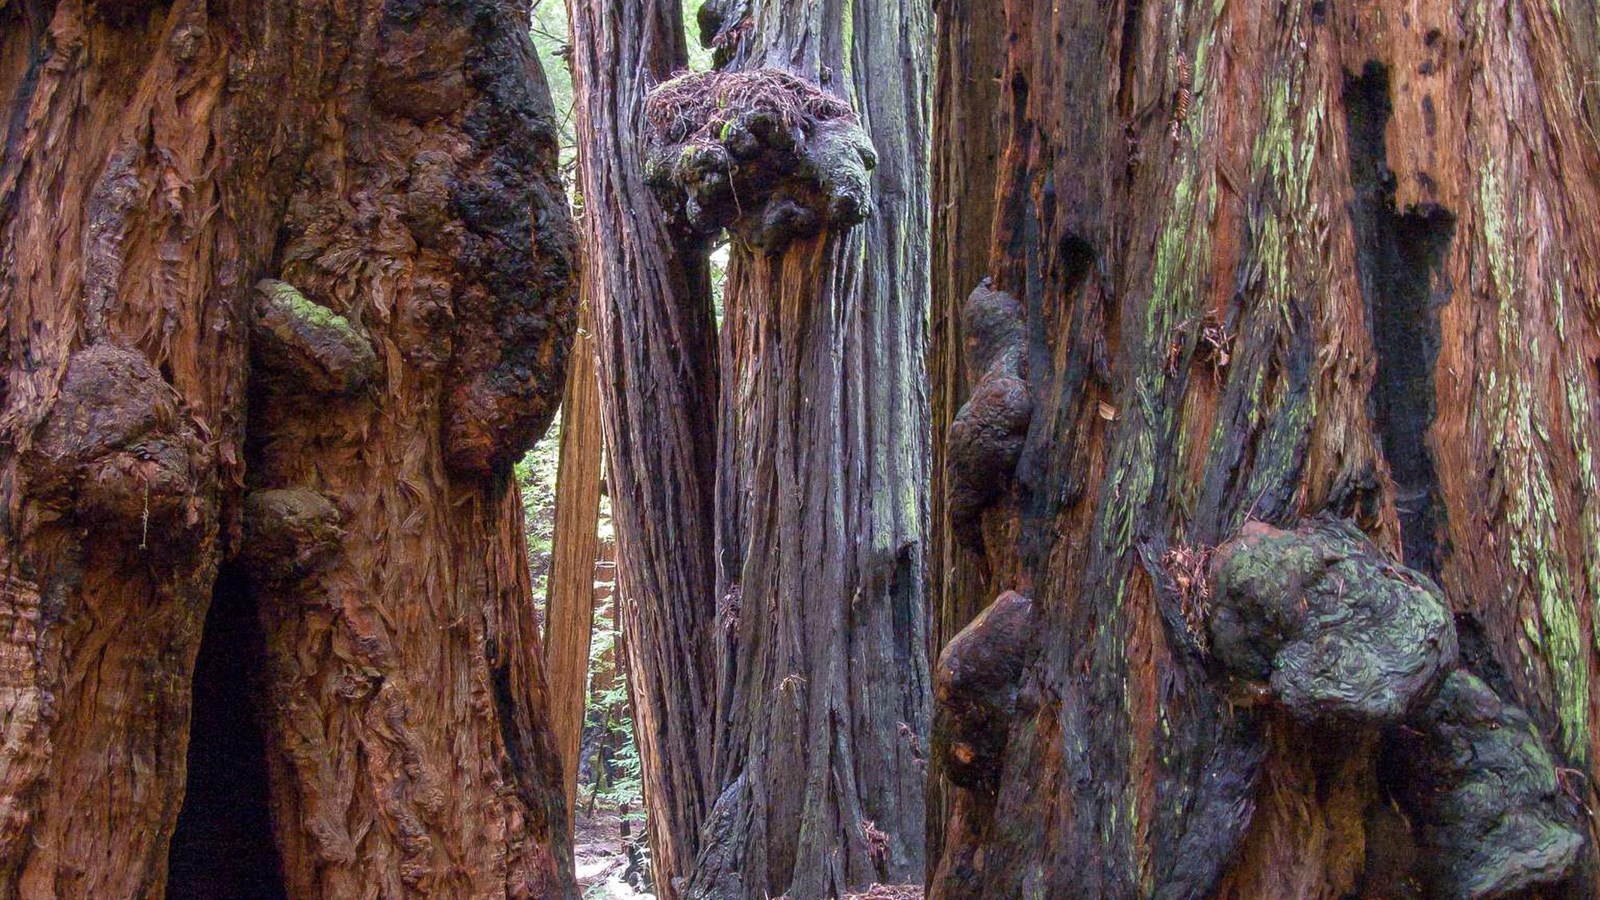 Redwoods covered in knotty burls with old fire scars still clearly visible. 